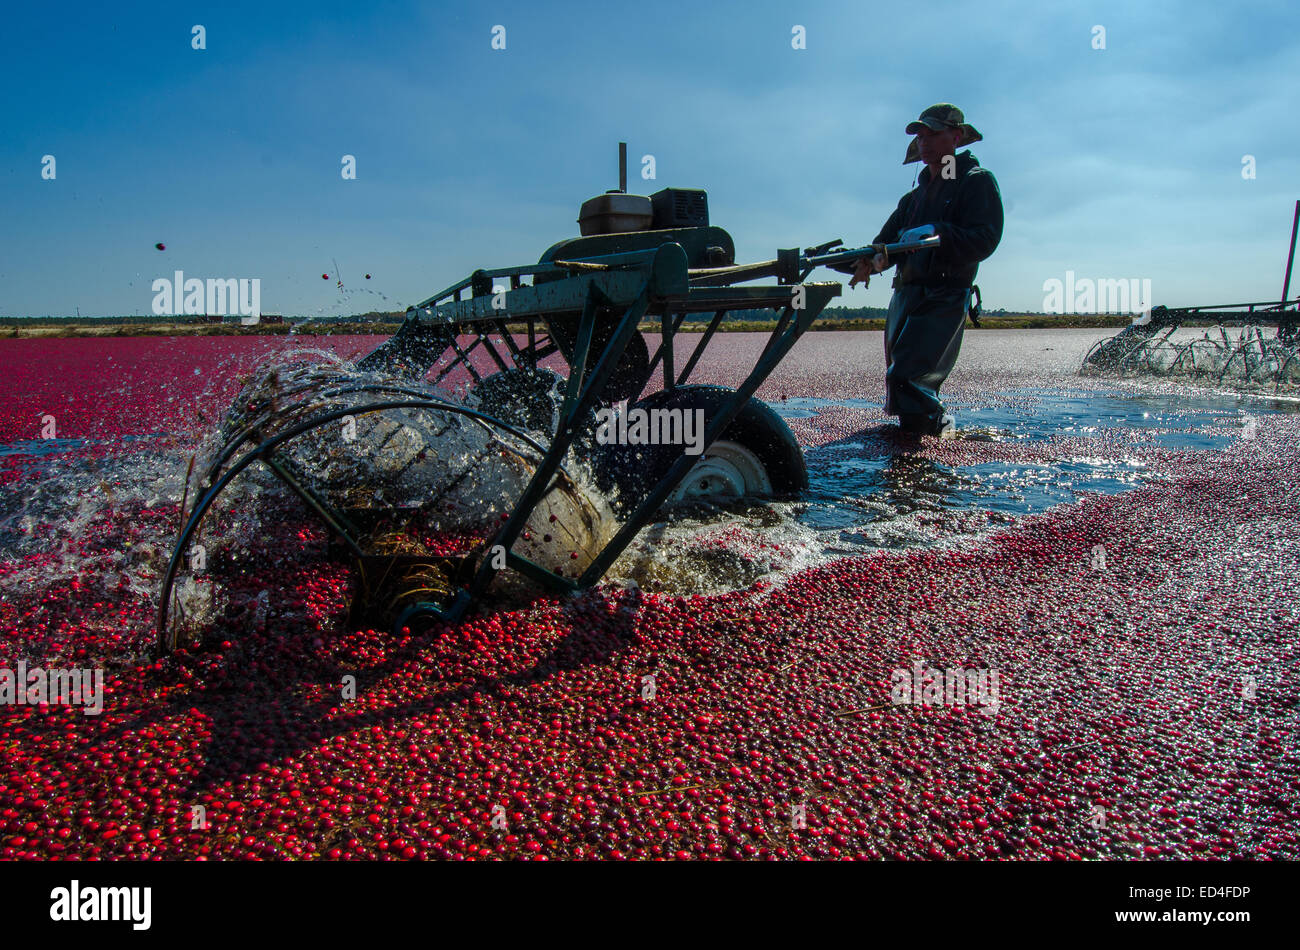 Water reels or 'egg beaters' remove the cranberries from their vines and allow for the water harvesting of the berries. Stock Photo